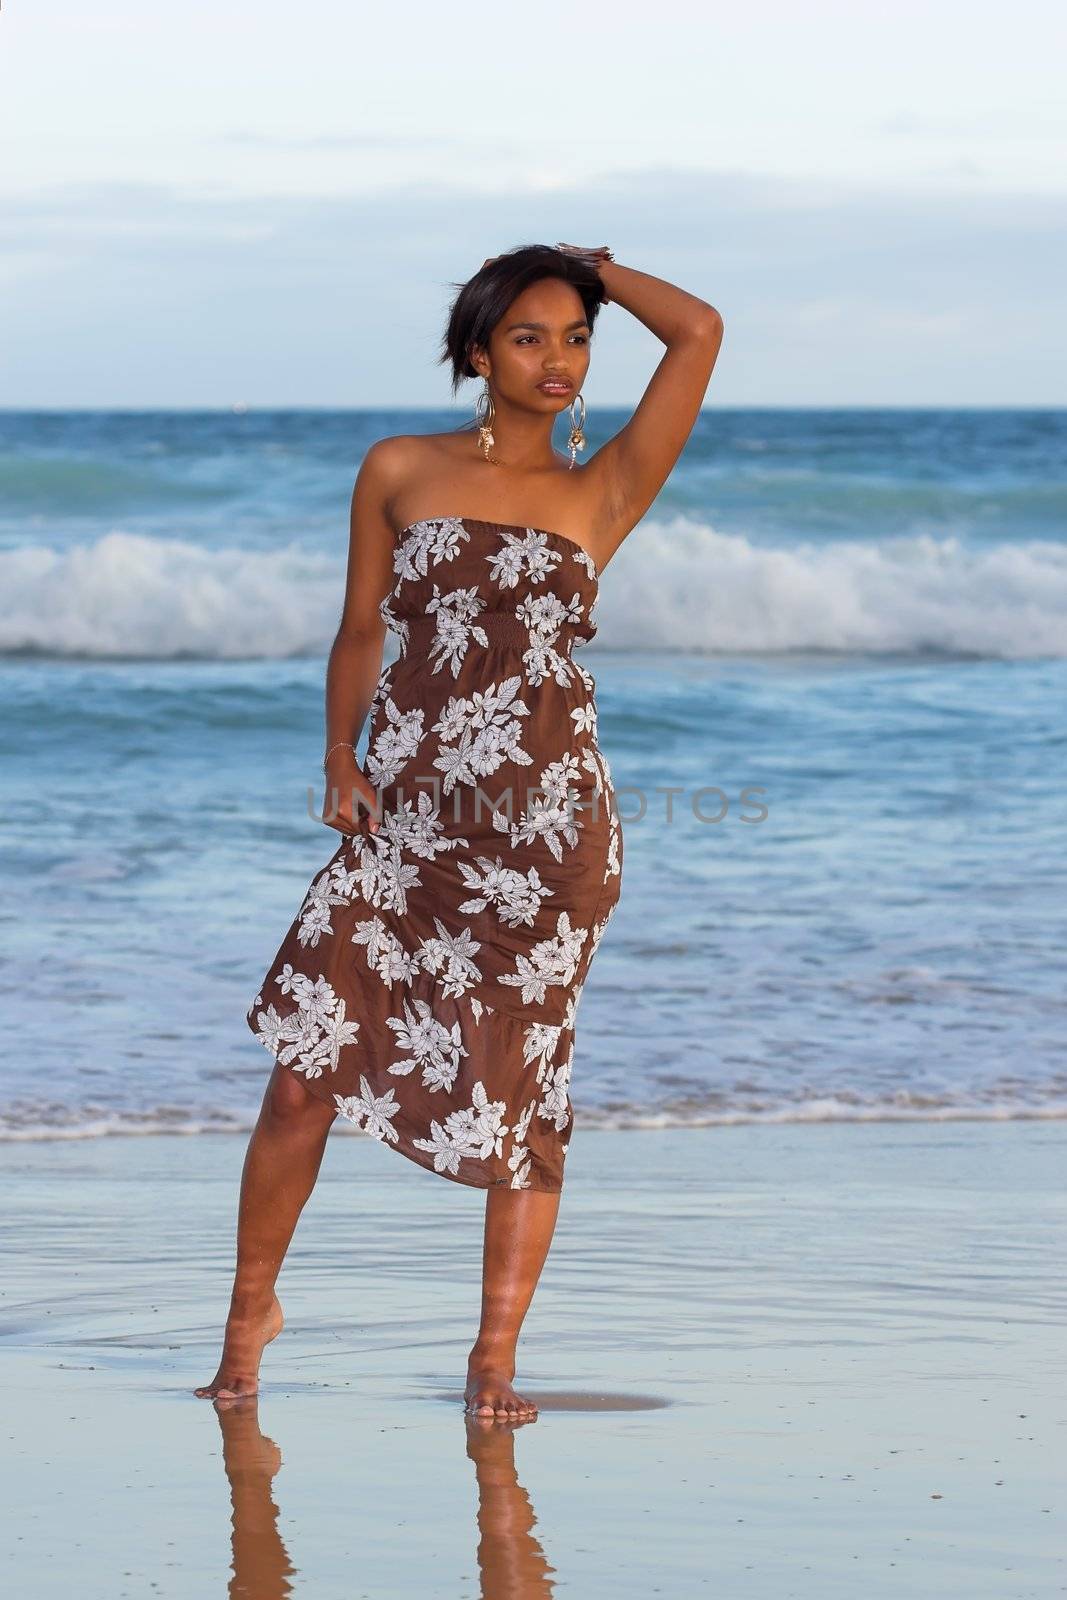 Ethnic model in brown floral dress at the beach